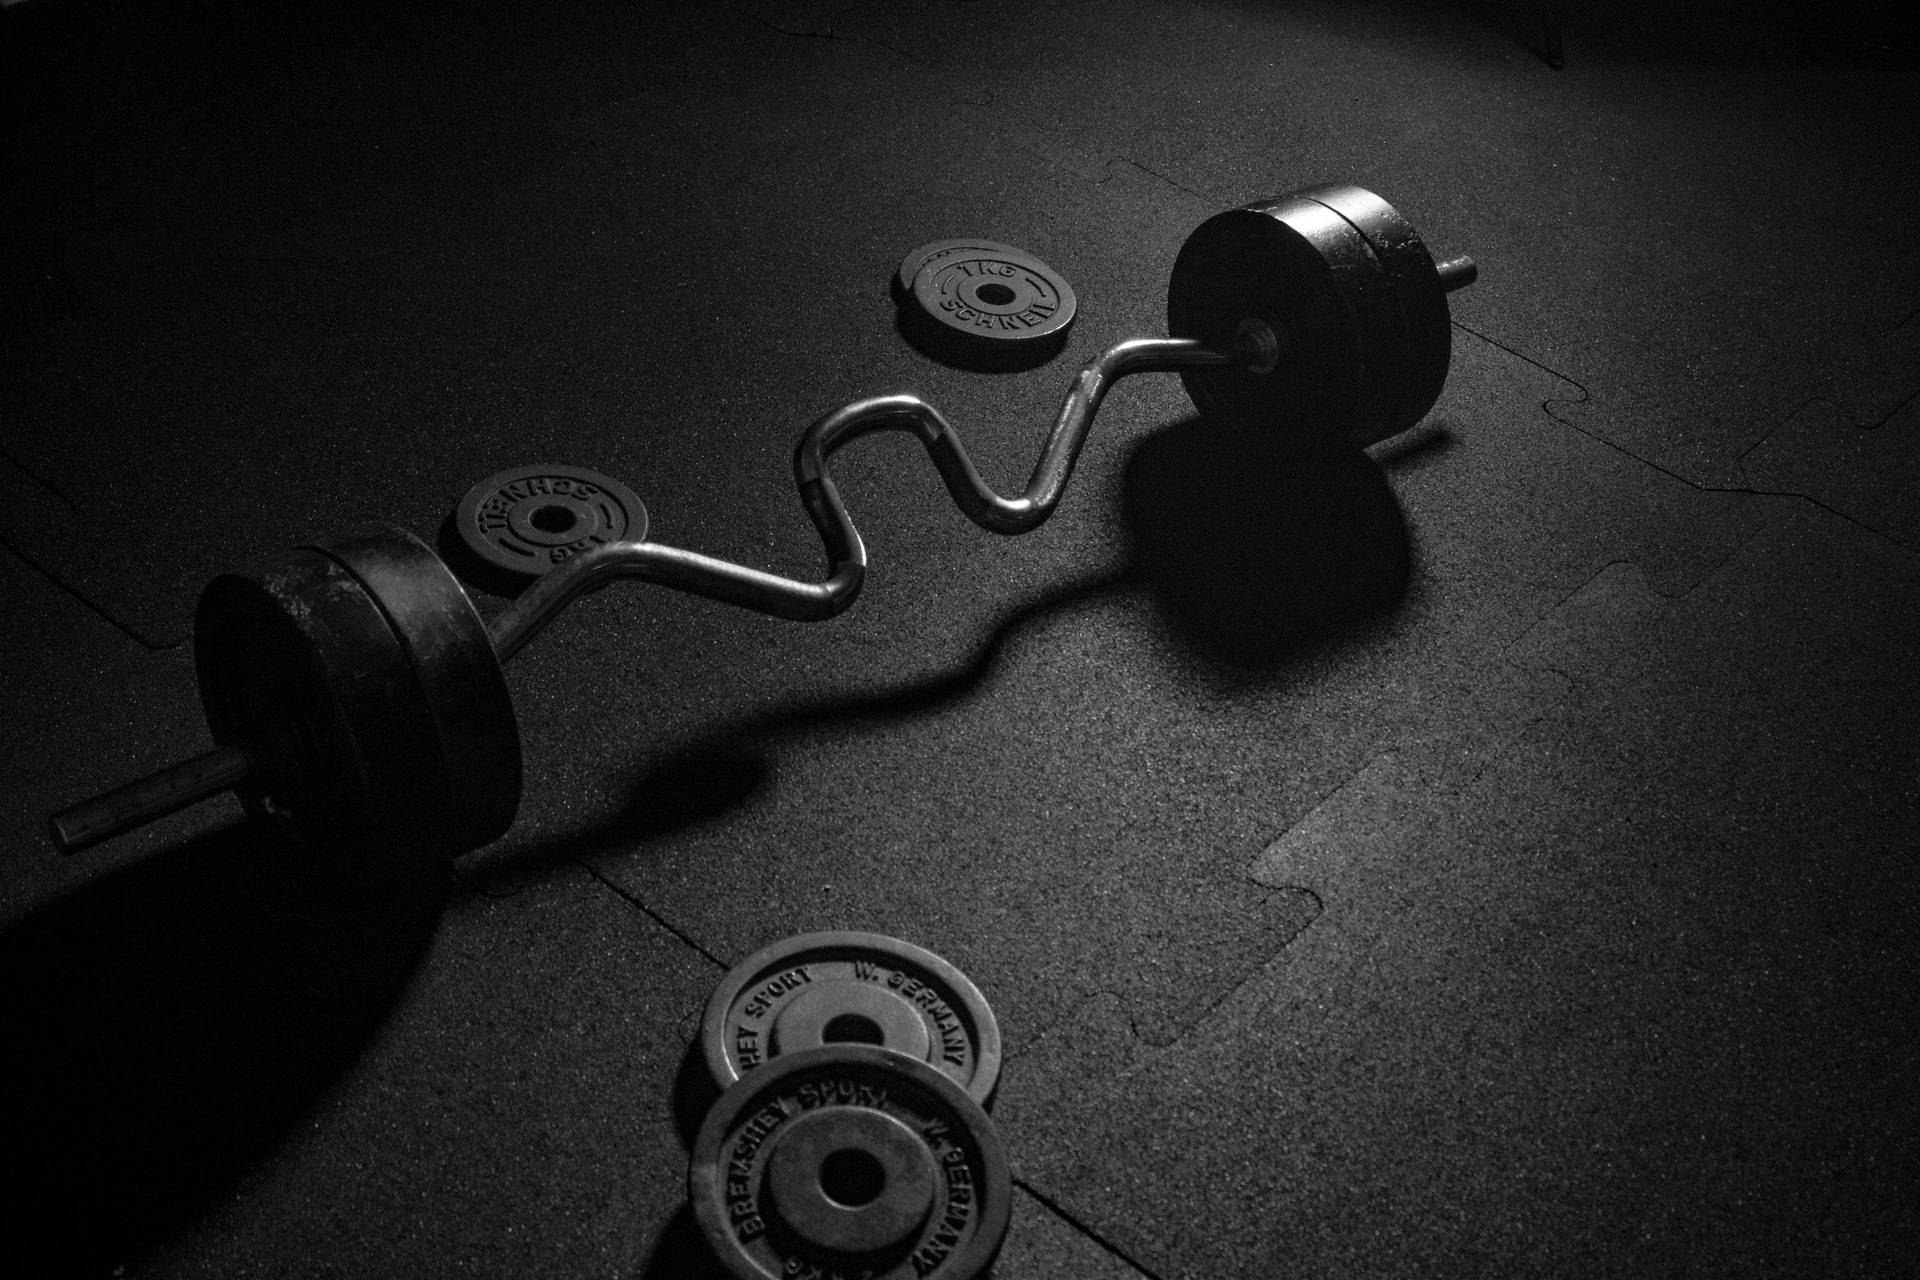 Free Gym Wallpaper Downloads, [600+] Gym Wallpapers for FREE | Wallpapers .com